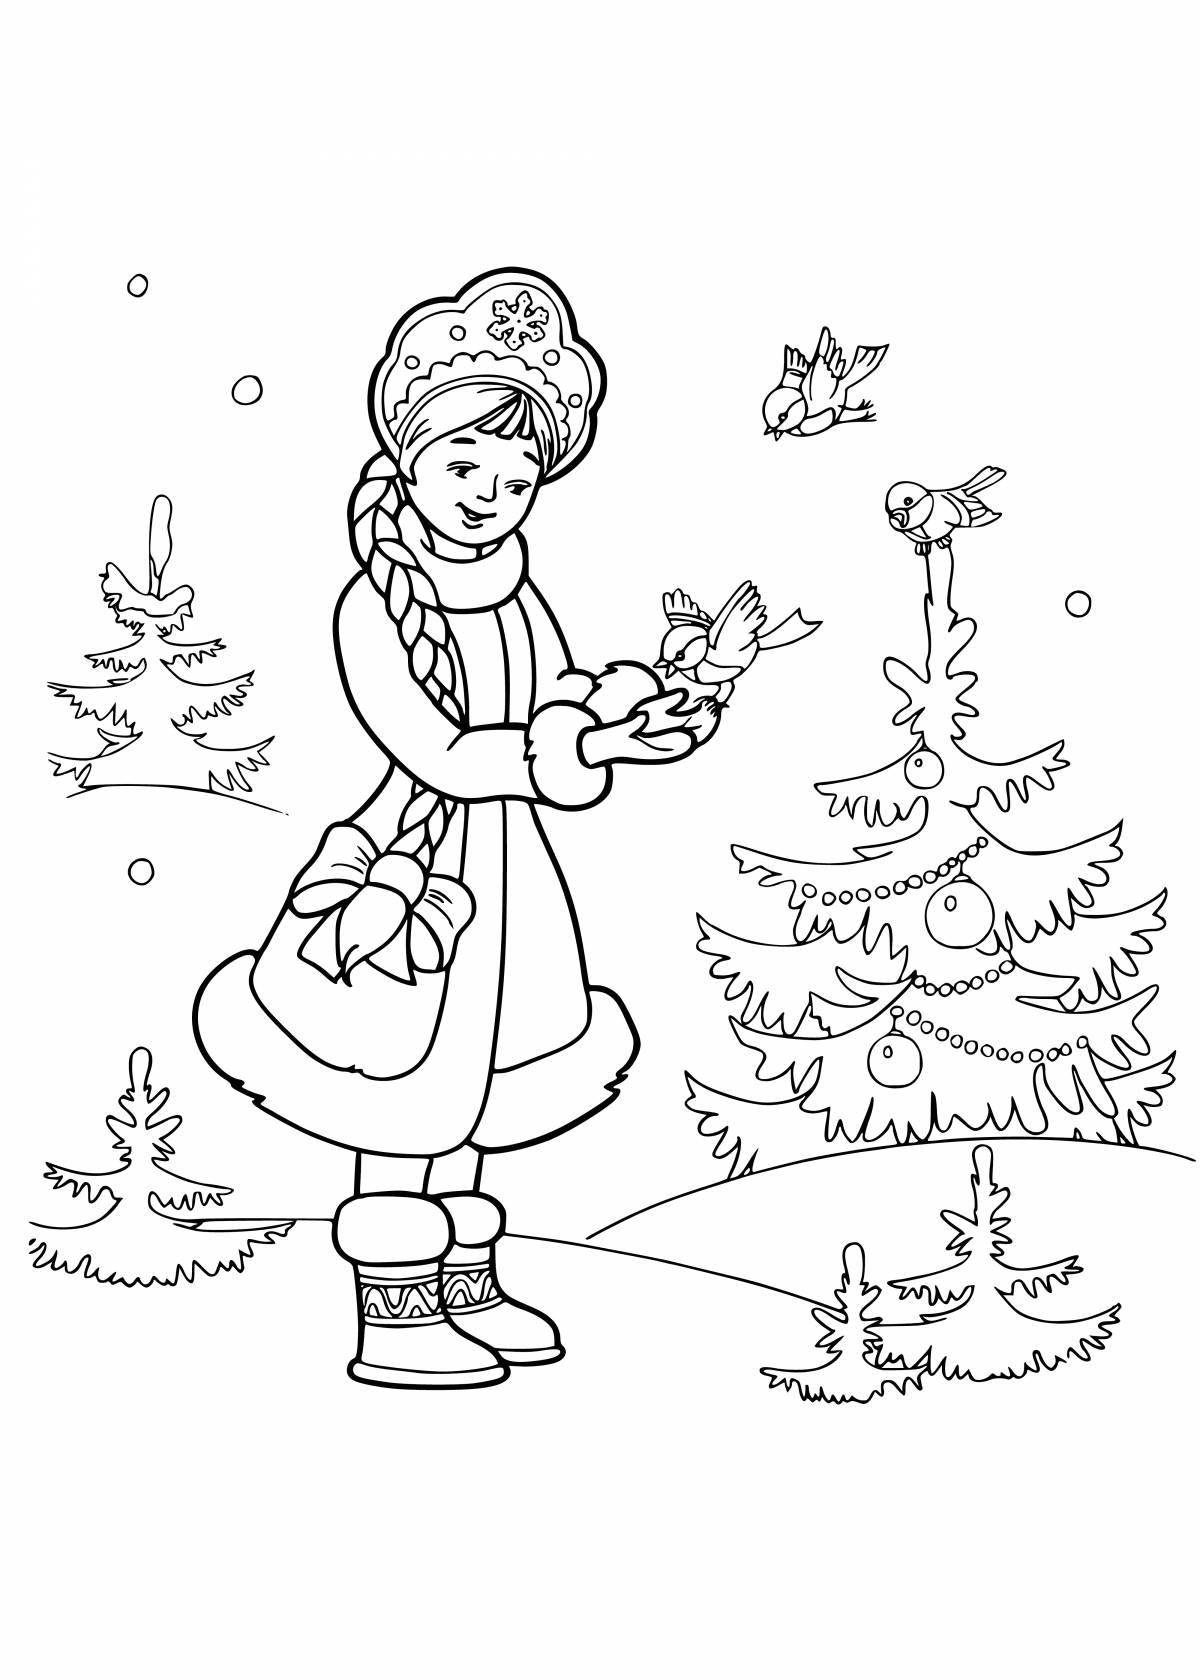 Coloring page glorious snow maiden